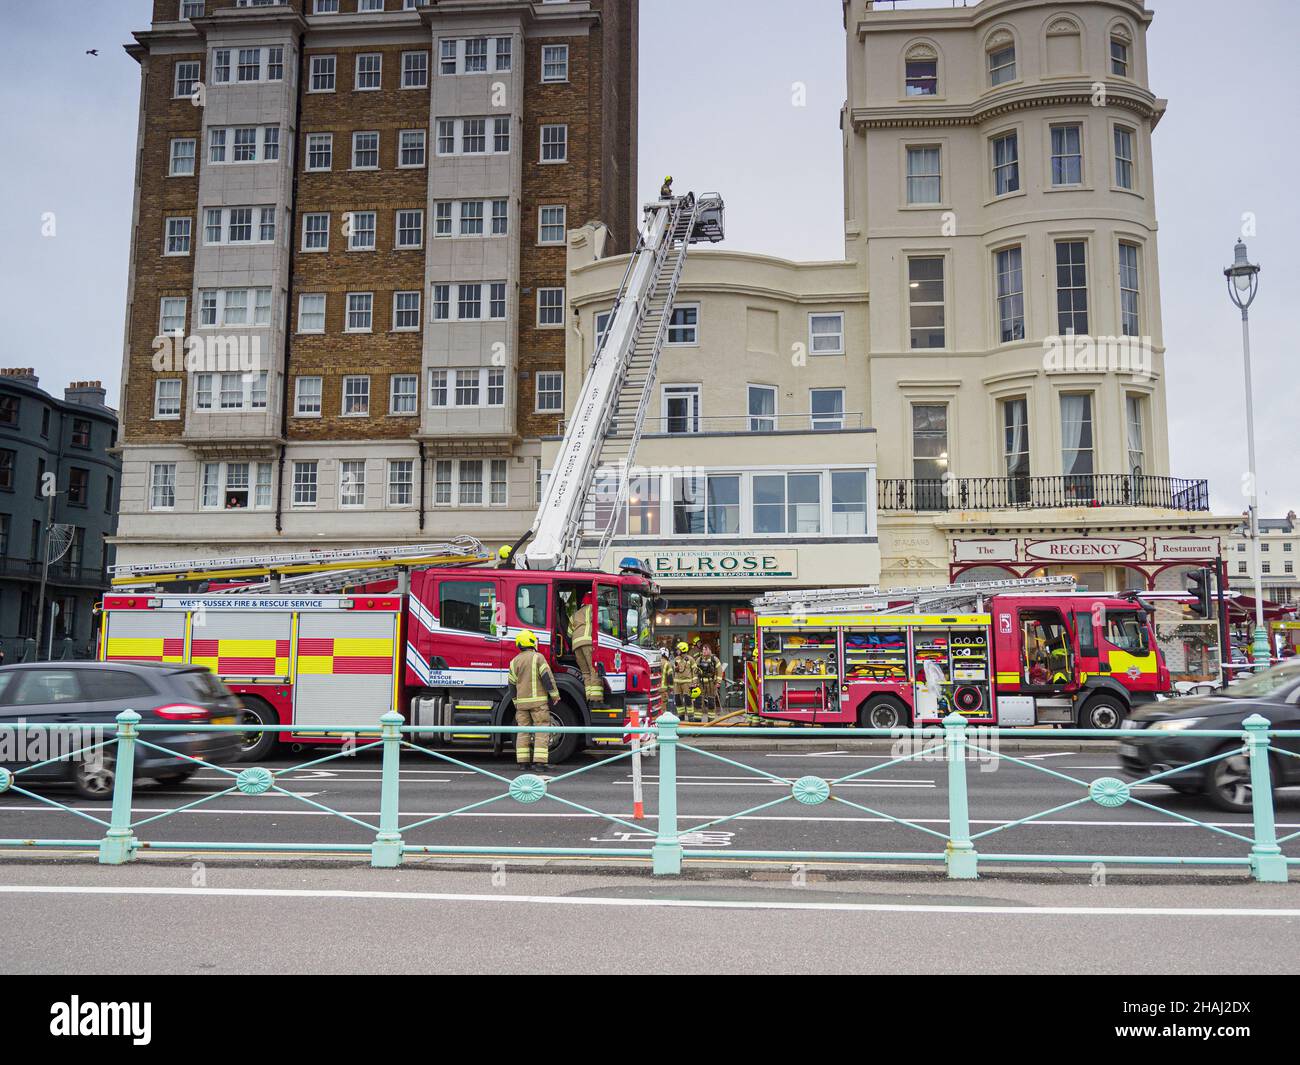 Fire alert at Melrose on Brighton seafront Stock Photo